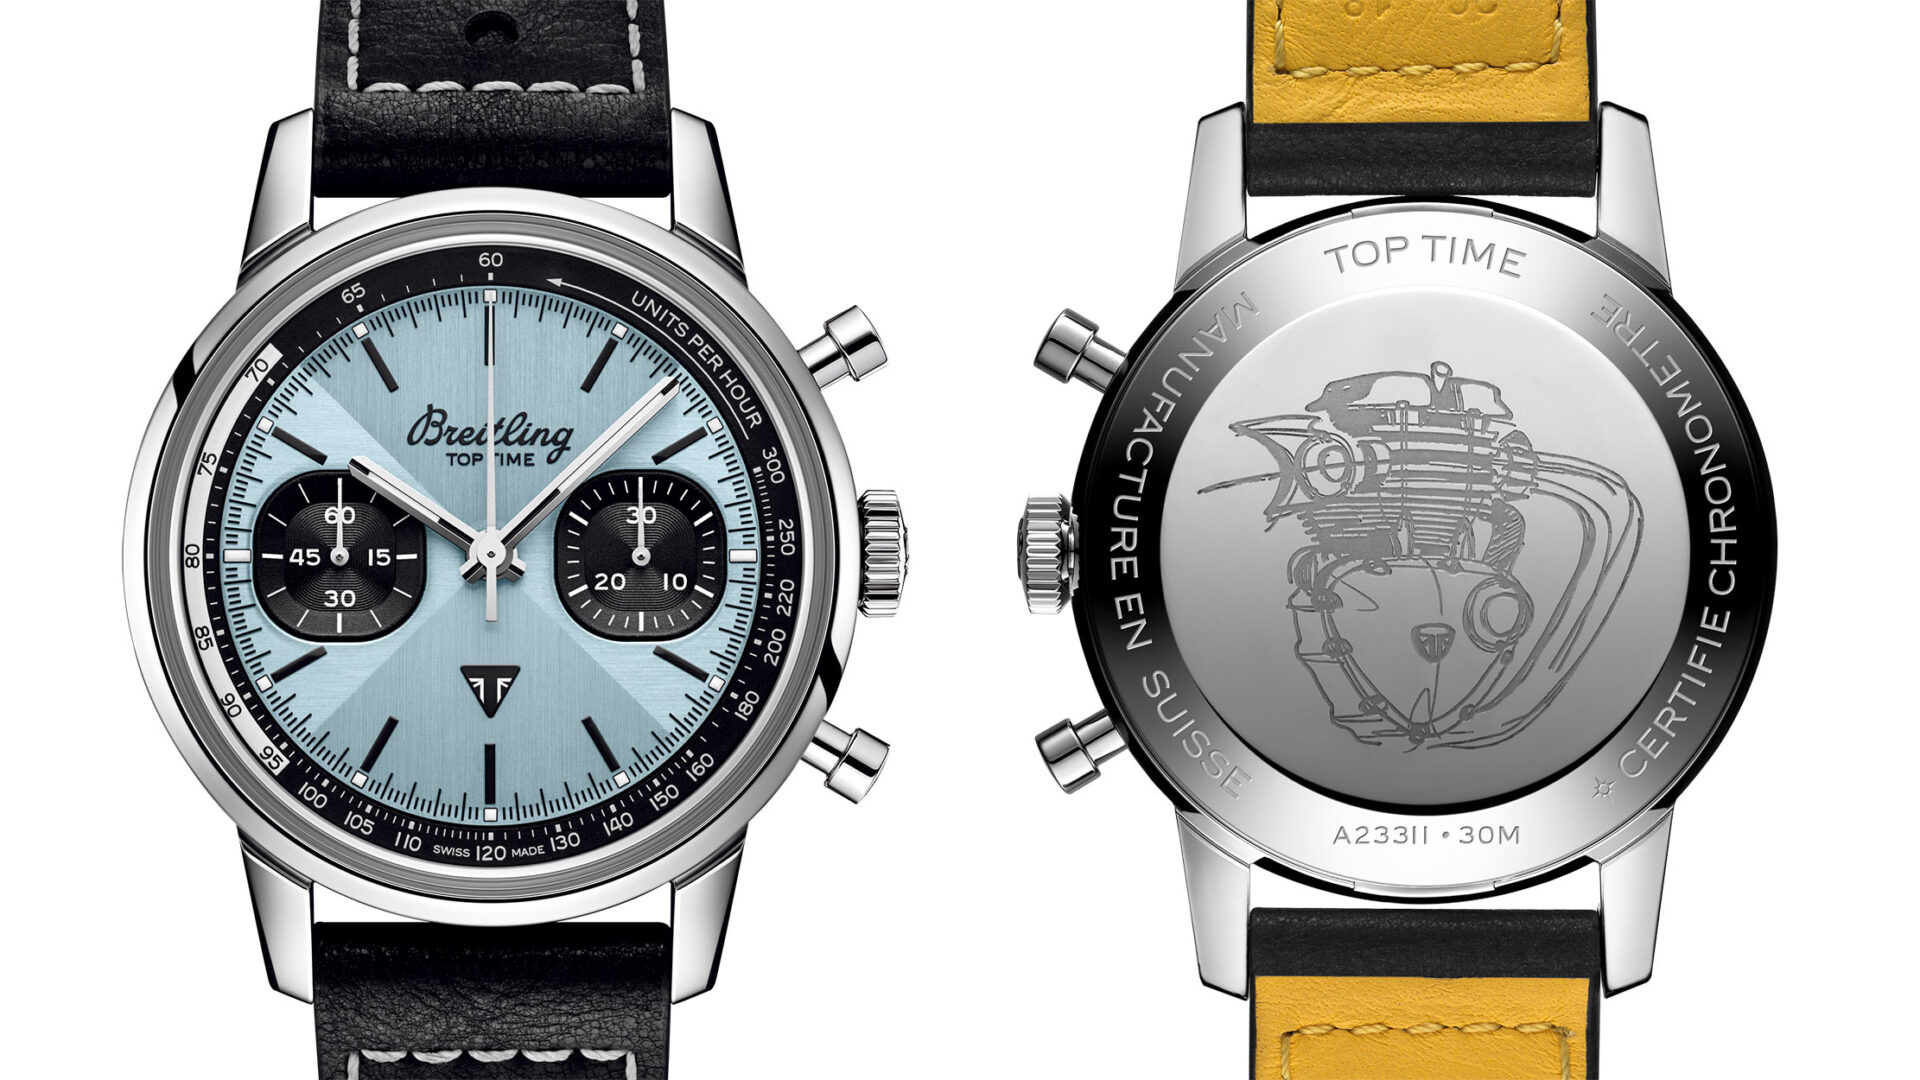 Breitling Top Time Triumph duo